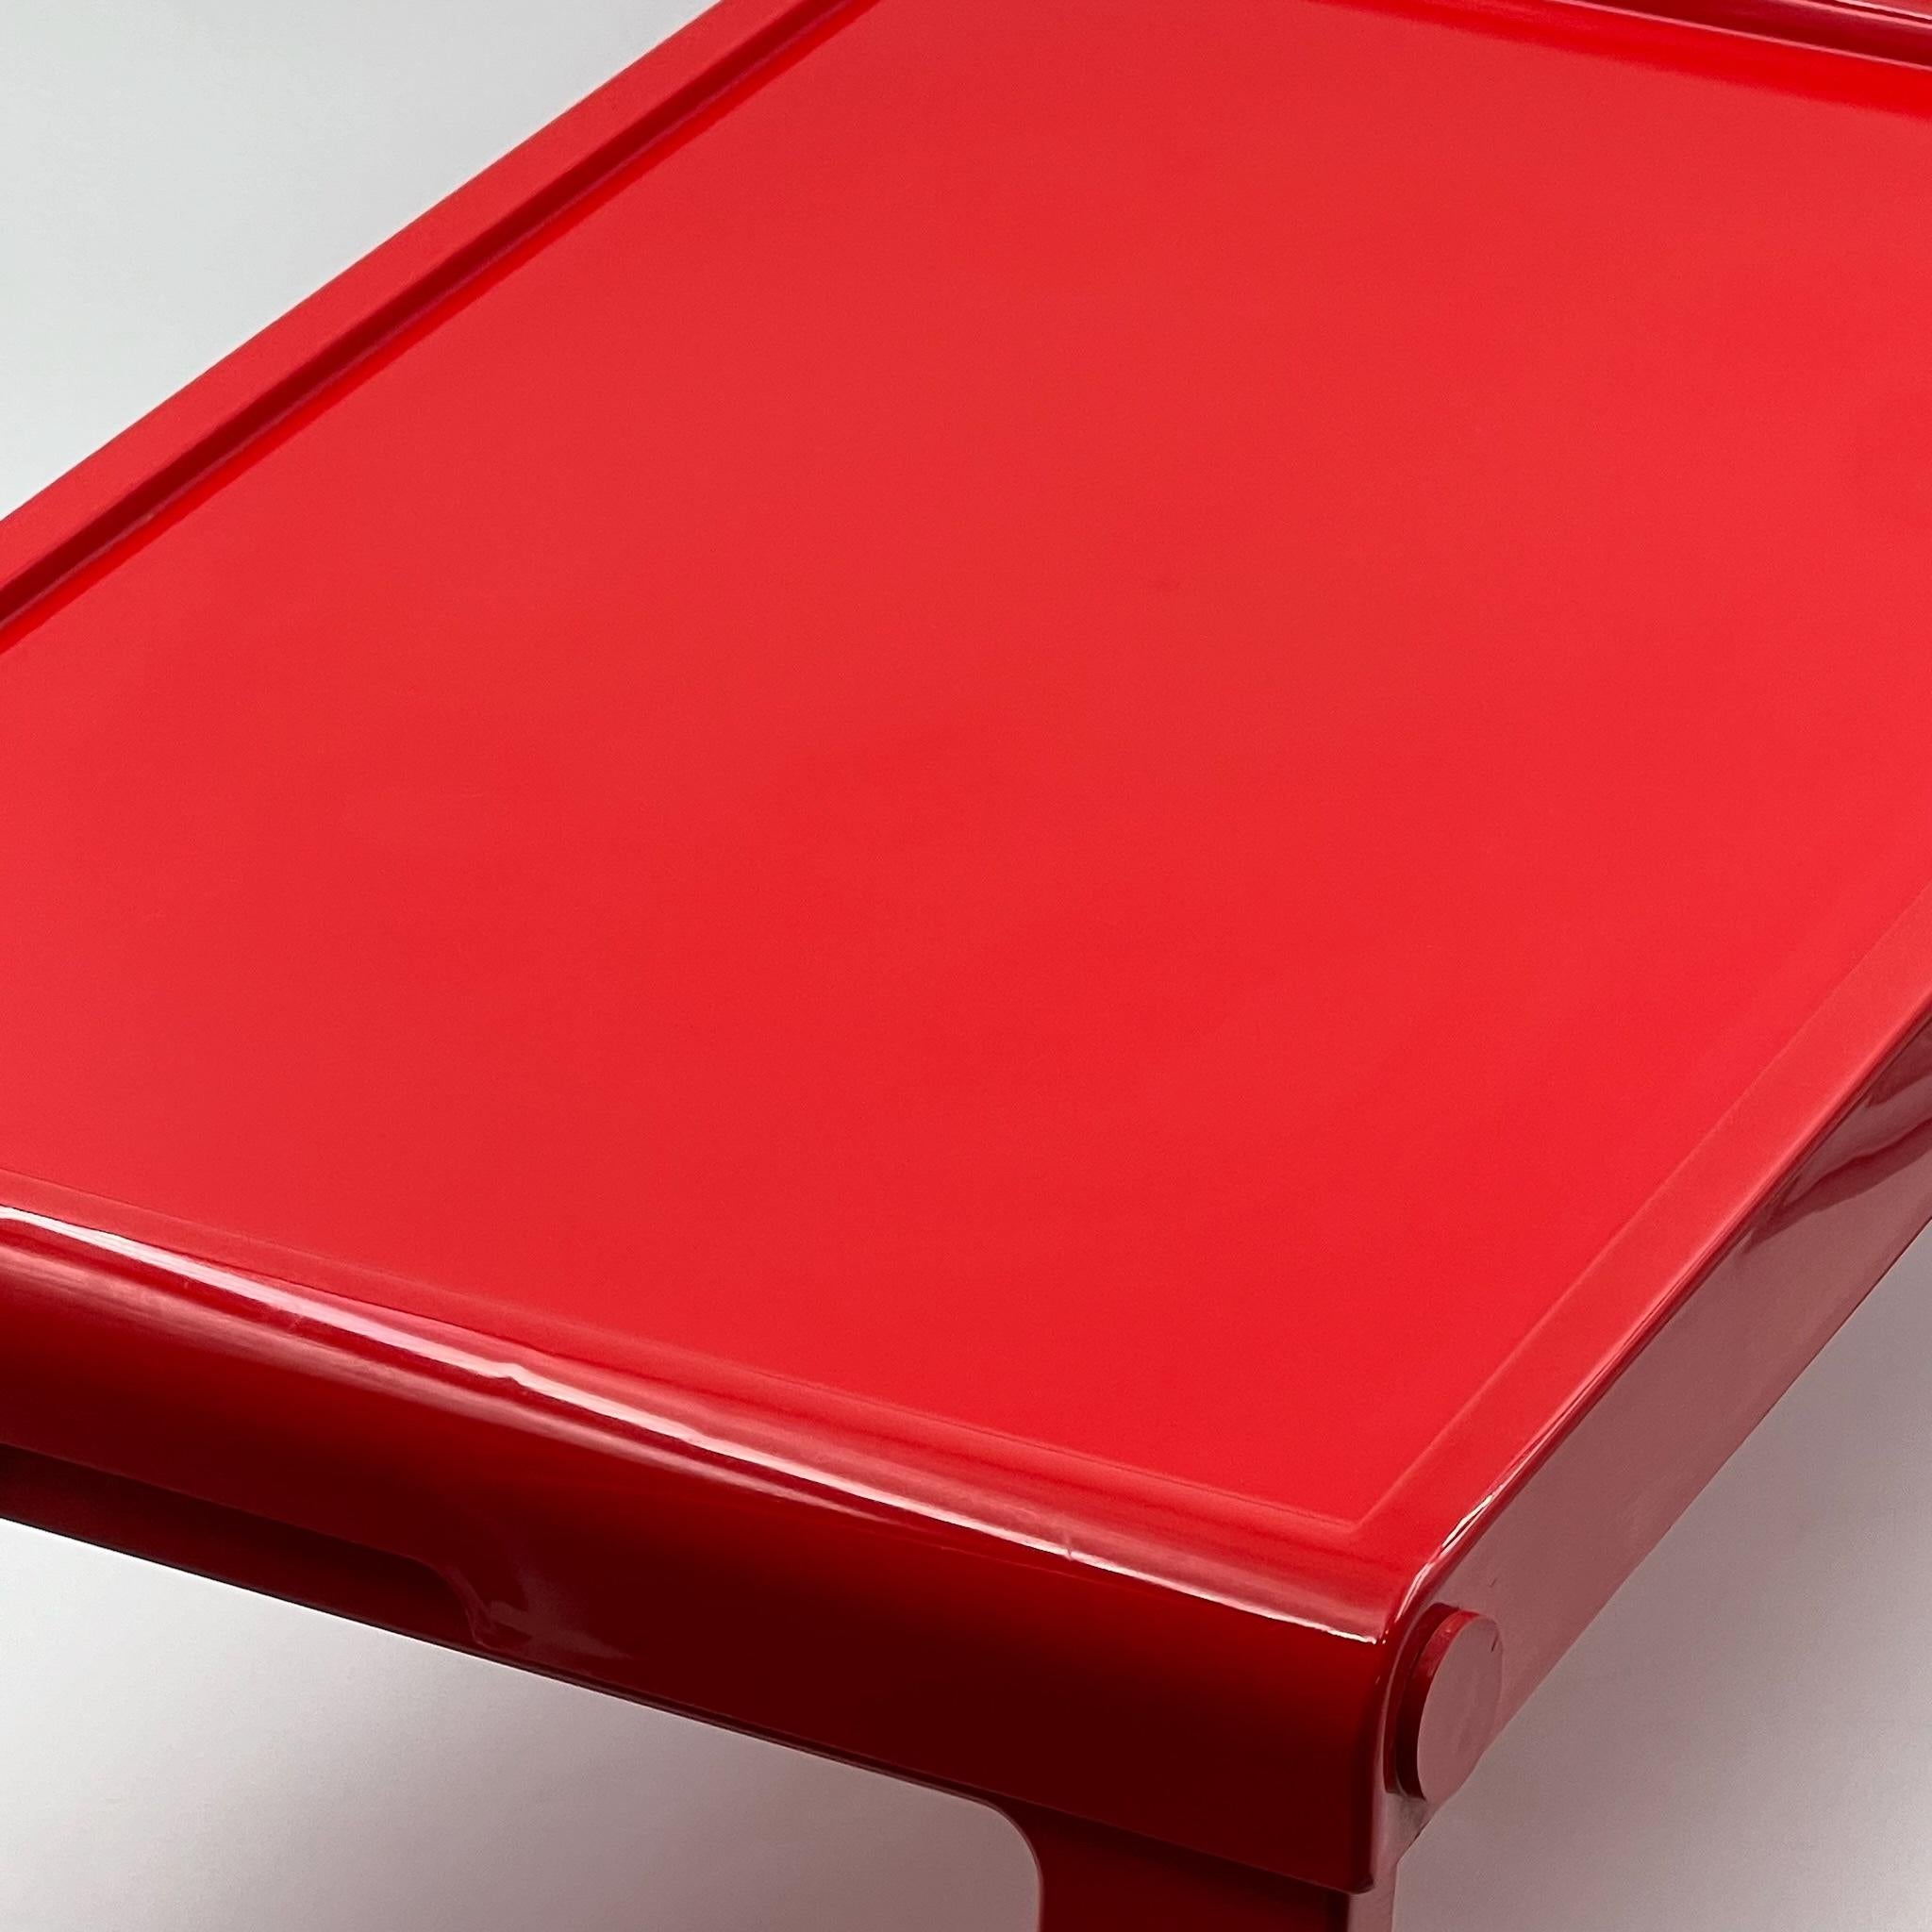 Plastic Iconic Tray Table 'Jolly' by Luigi Massoni for Guzzini in Glossy Red , 1970s For Sale